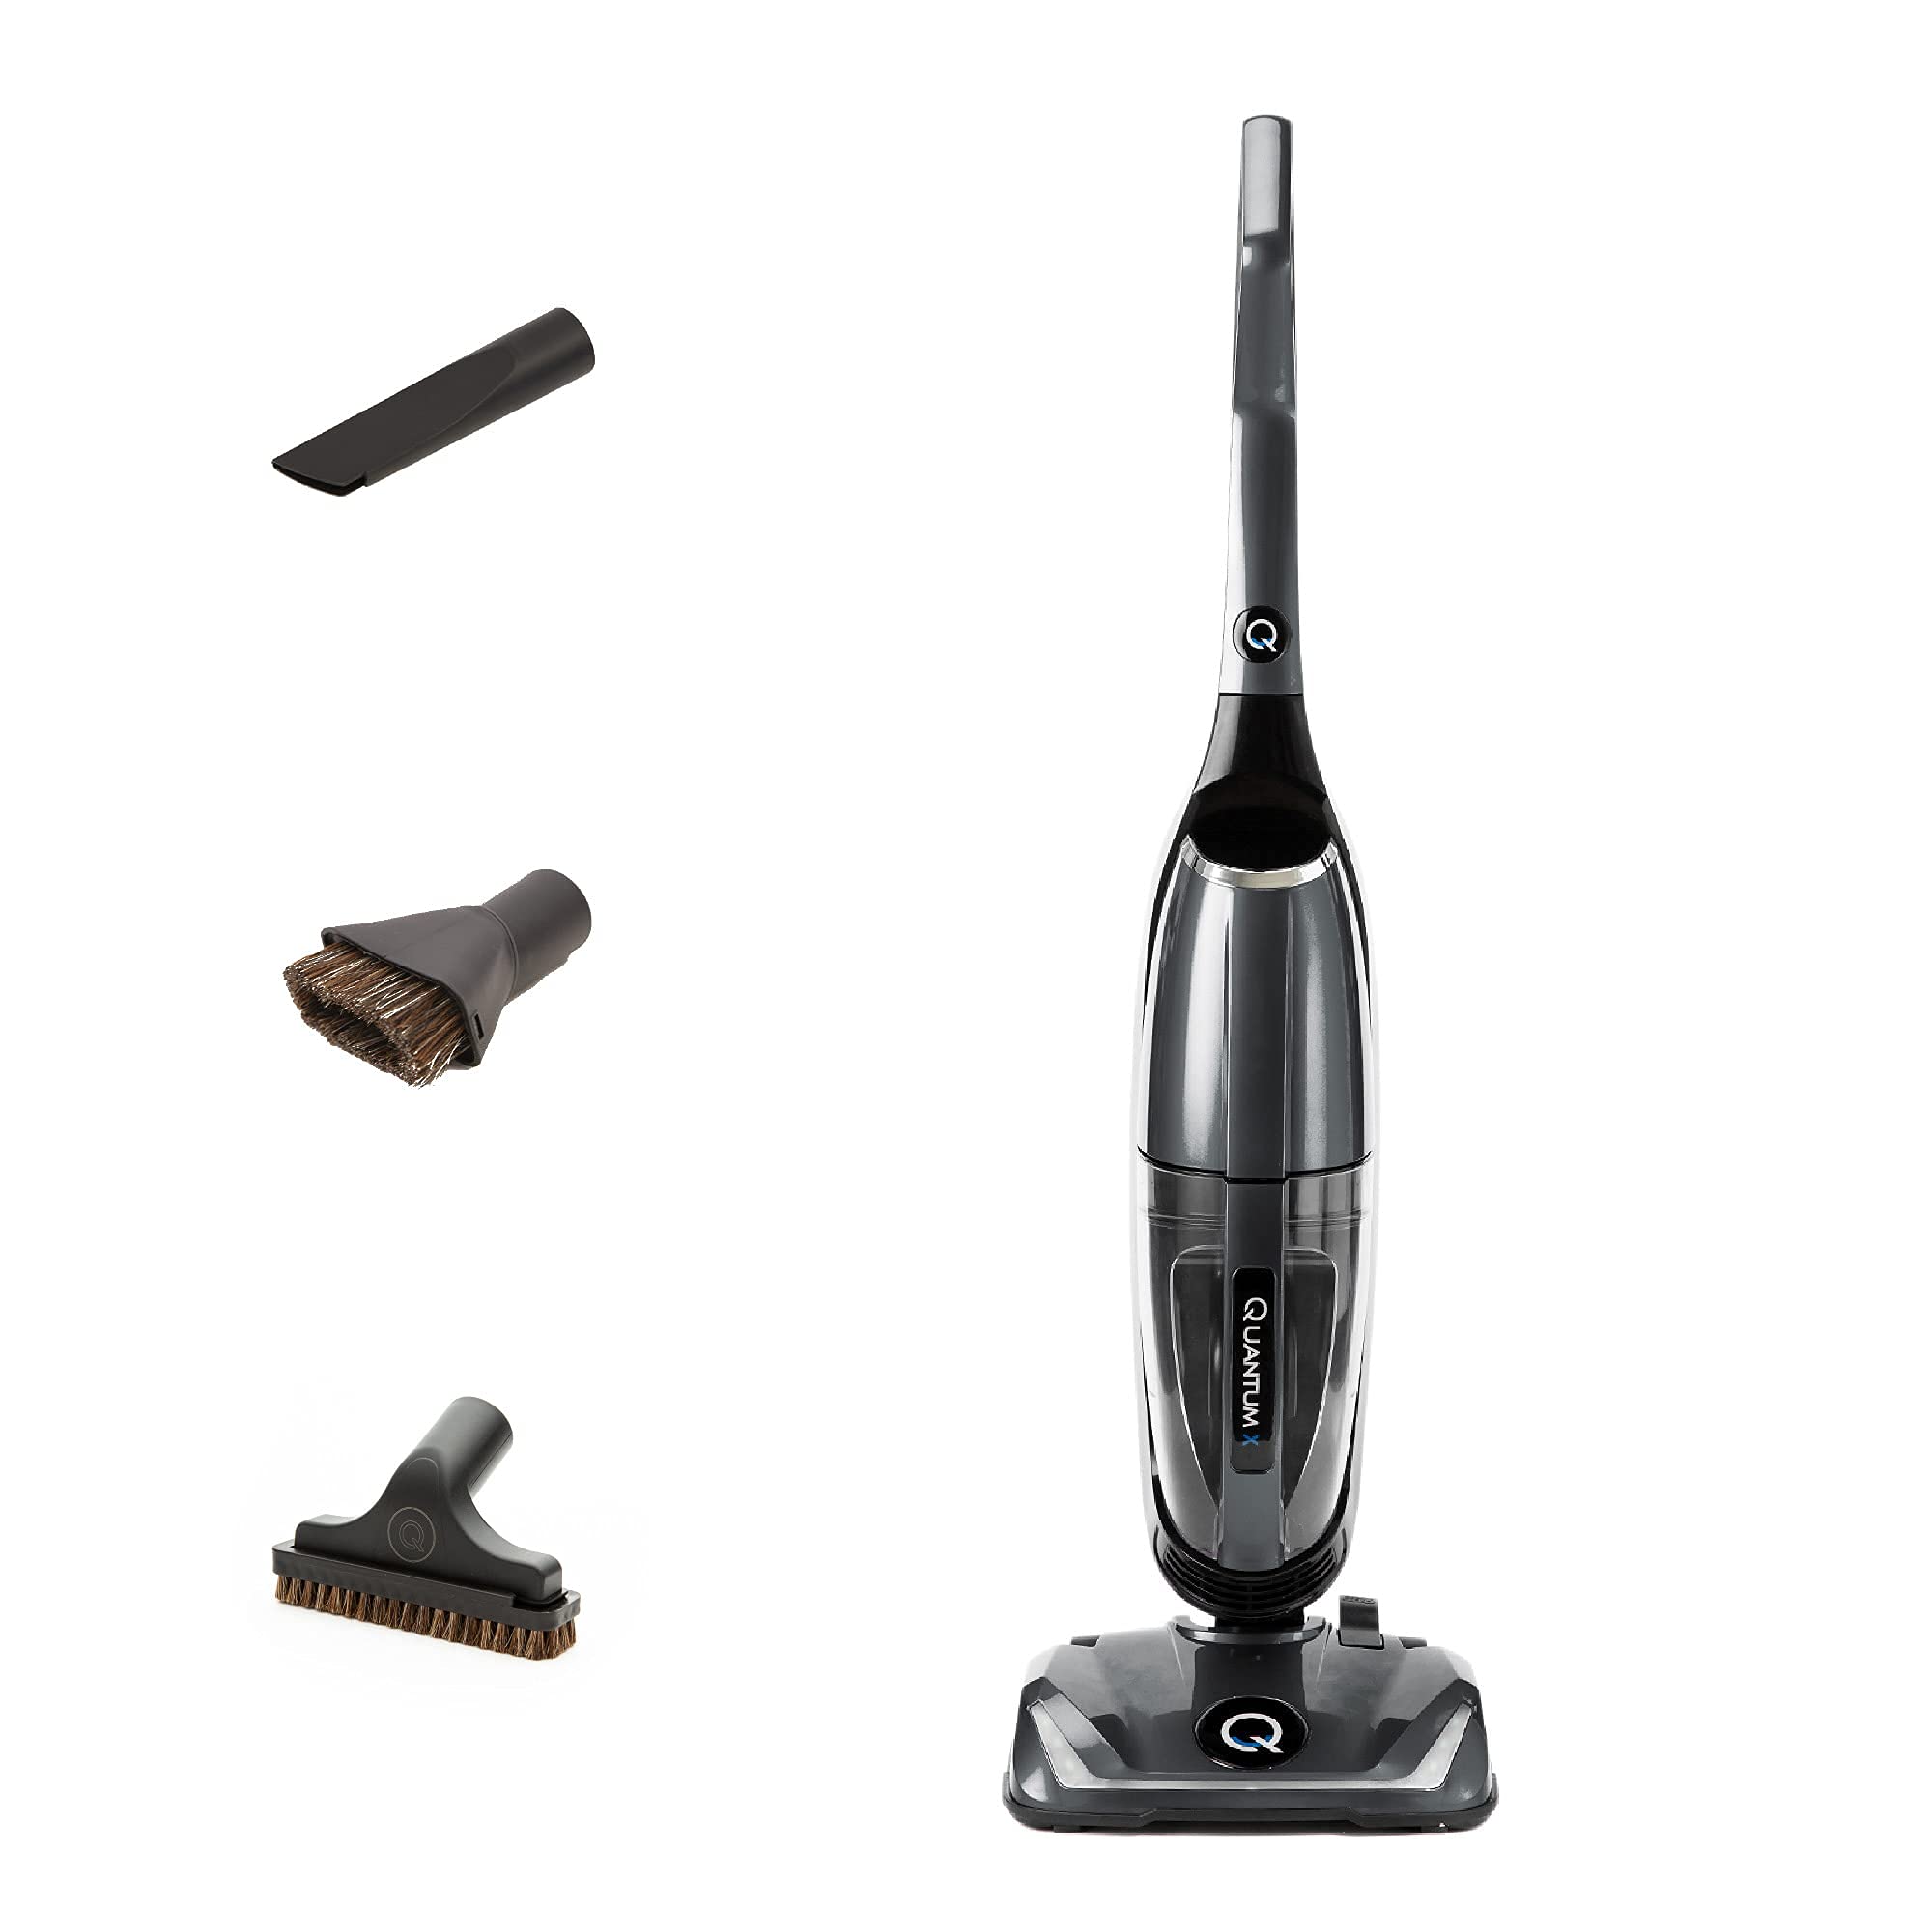 How Much Is a Quantum X Vacuum Cleaner?